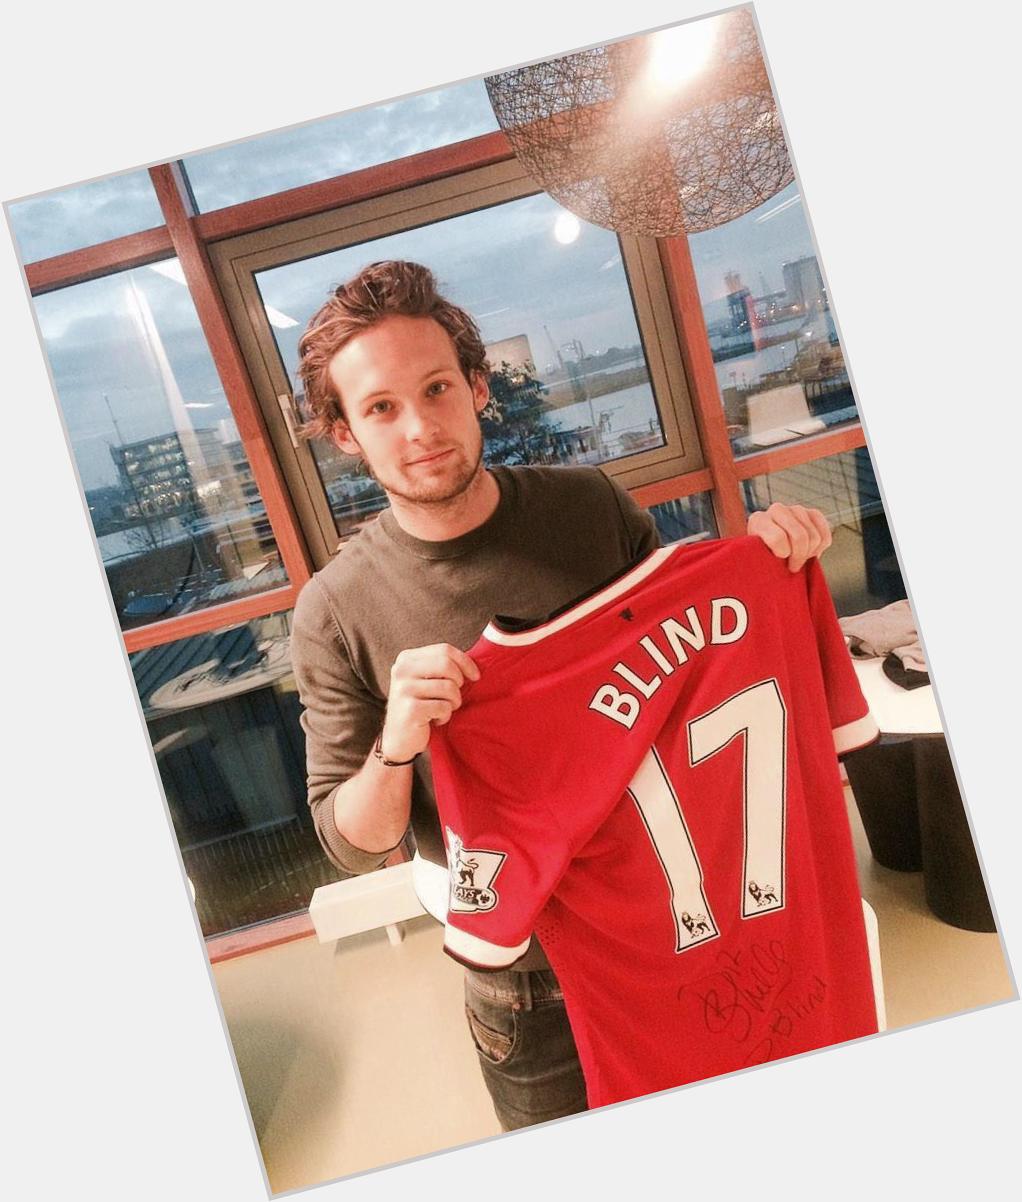 HAPPY BIRTHDAY DALEY BLIND YOU SEXY SPECIMEN OF A HUMAN BEING SWING YOUR LOVELY LOCK OF HAIR IN MY FACE SOMEDAY PLZ 